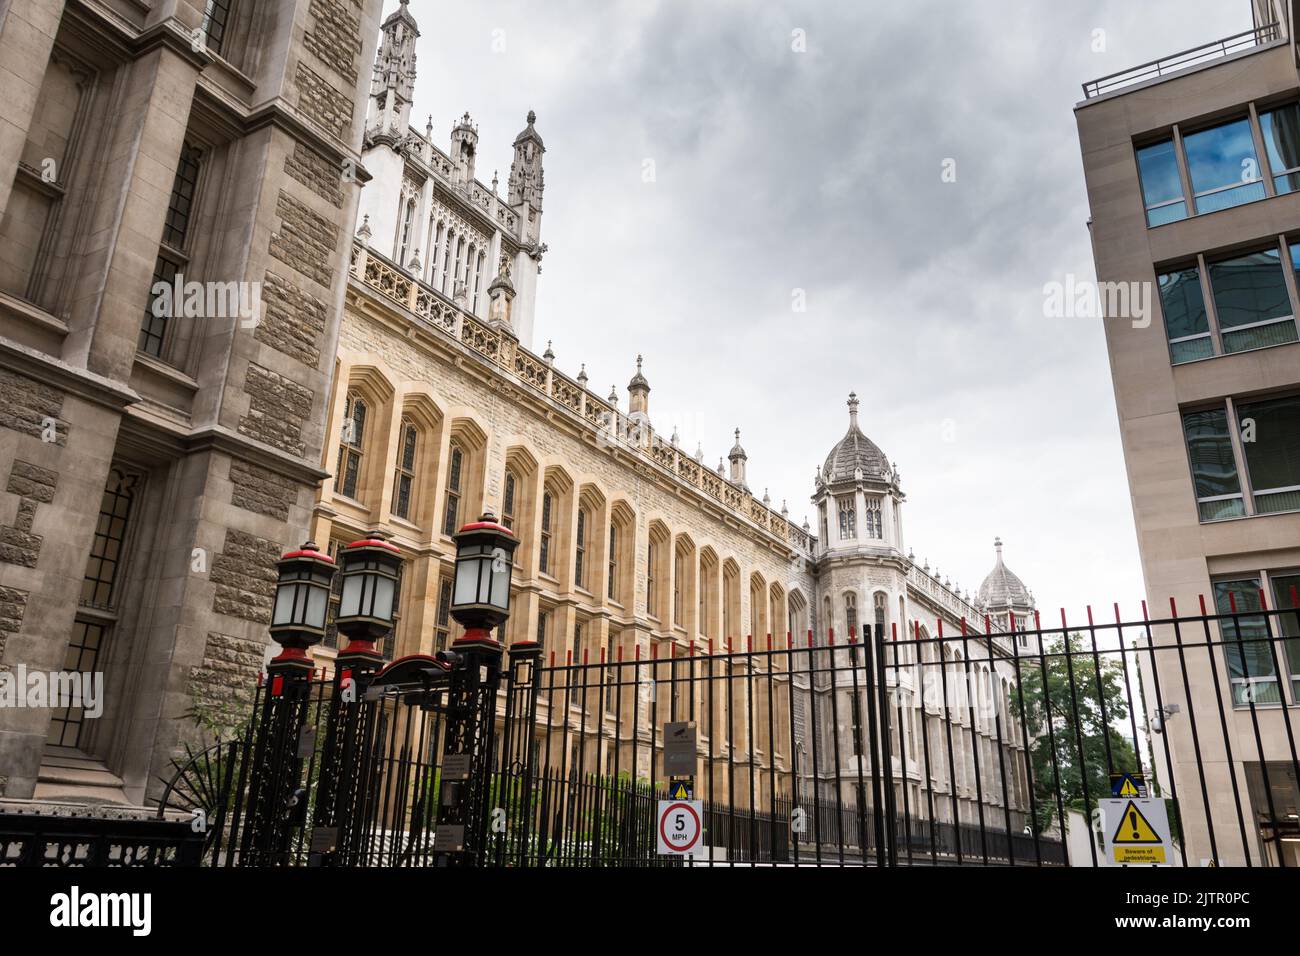 The Maughan Library, King's College London, Fetter Lane, London, England, UK Stock Photo